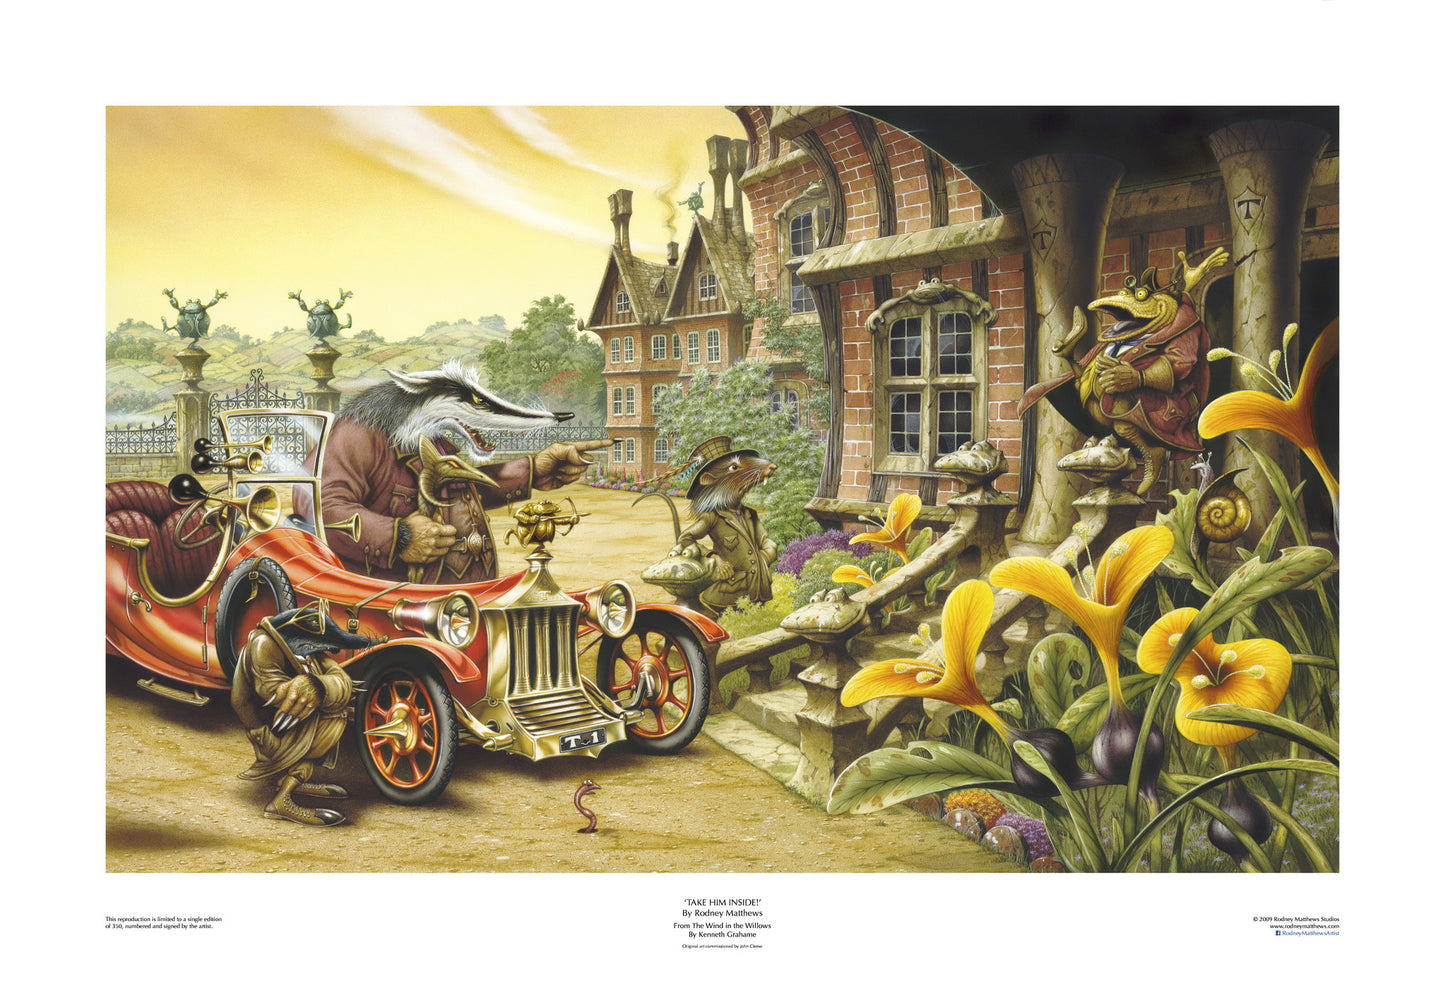 The Wind in the Willows: Take Him Inside! limited edition giclèe art print